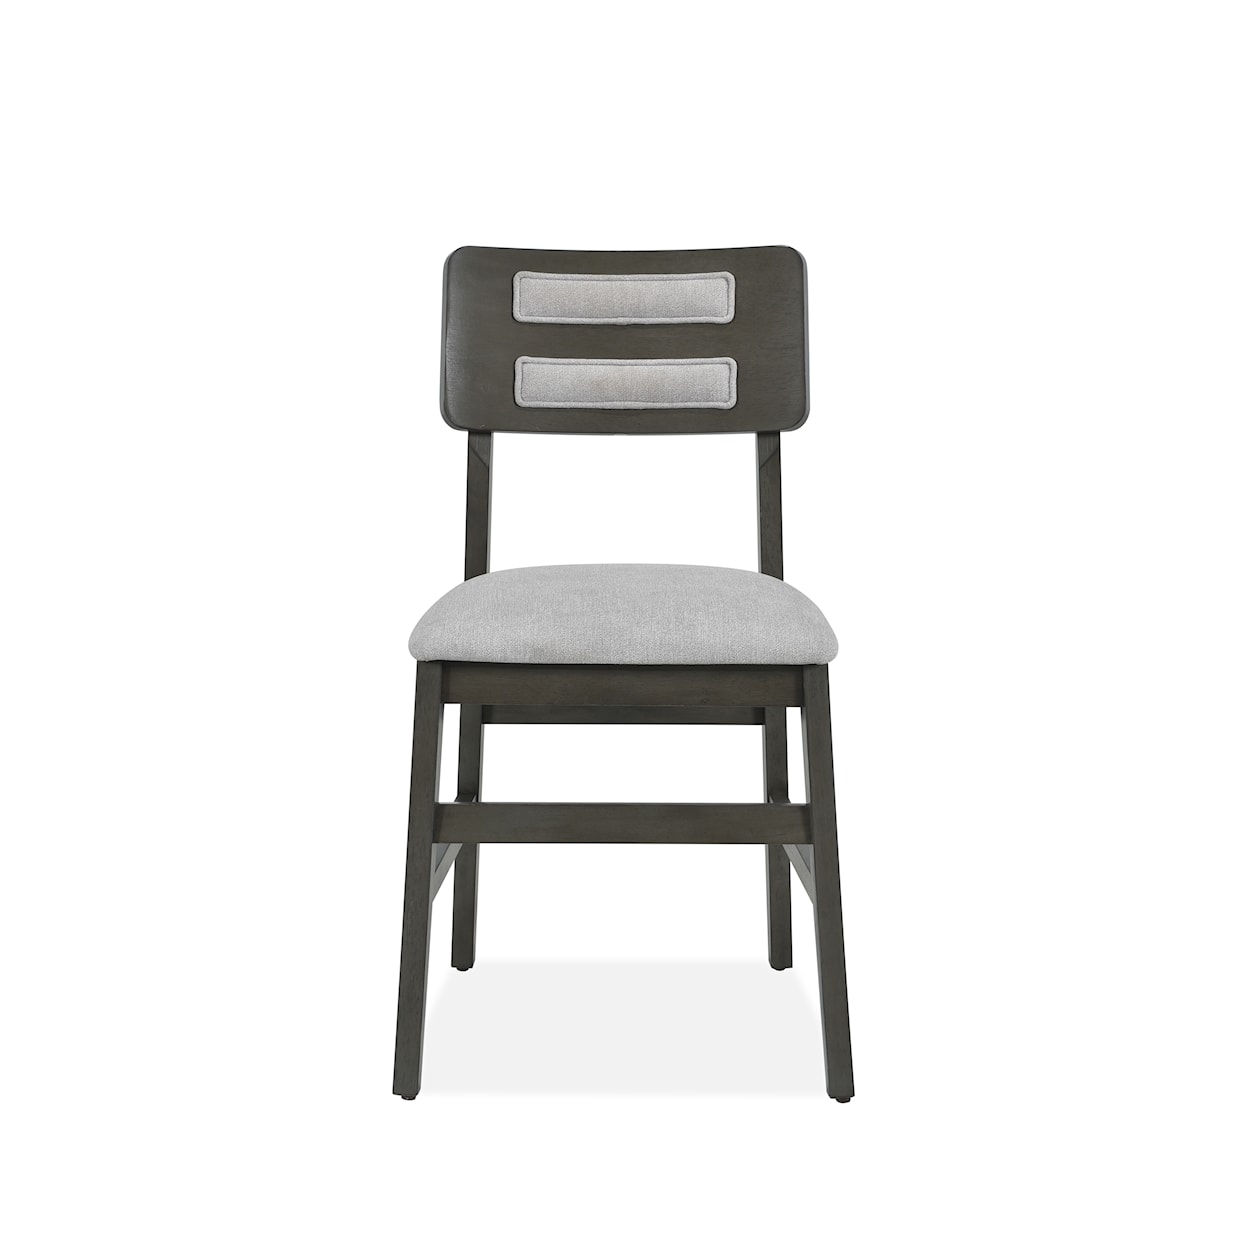 New Classic Bryson Dining Side Chair